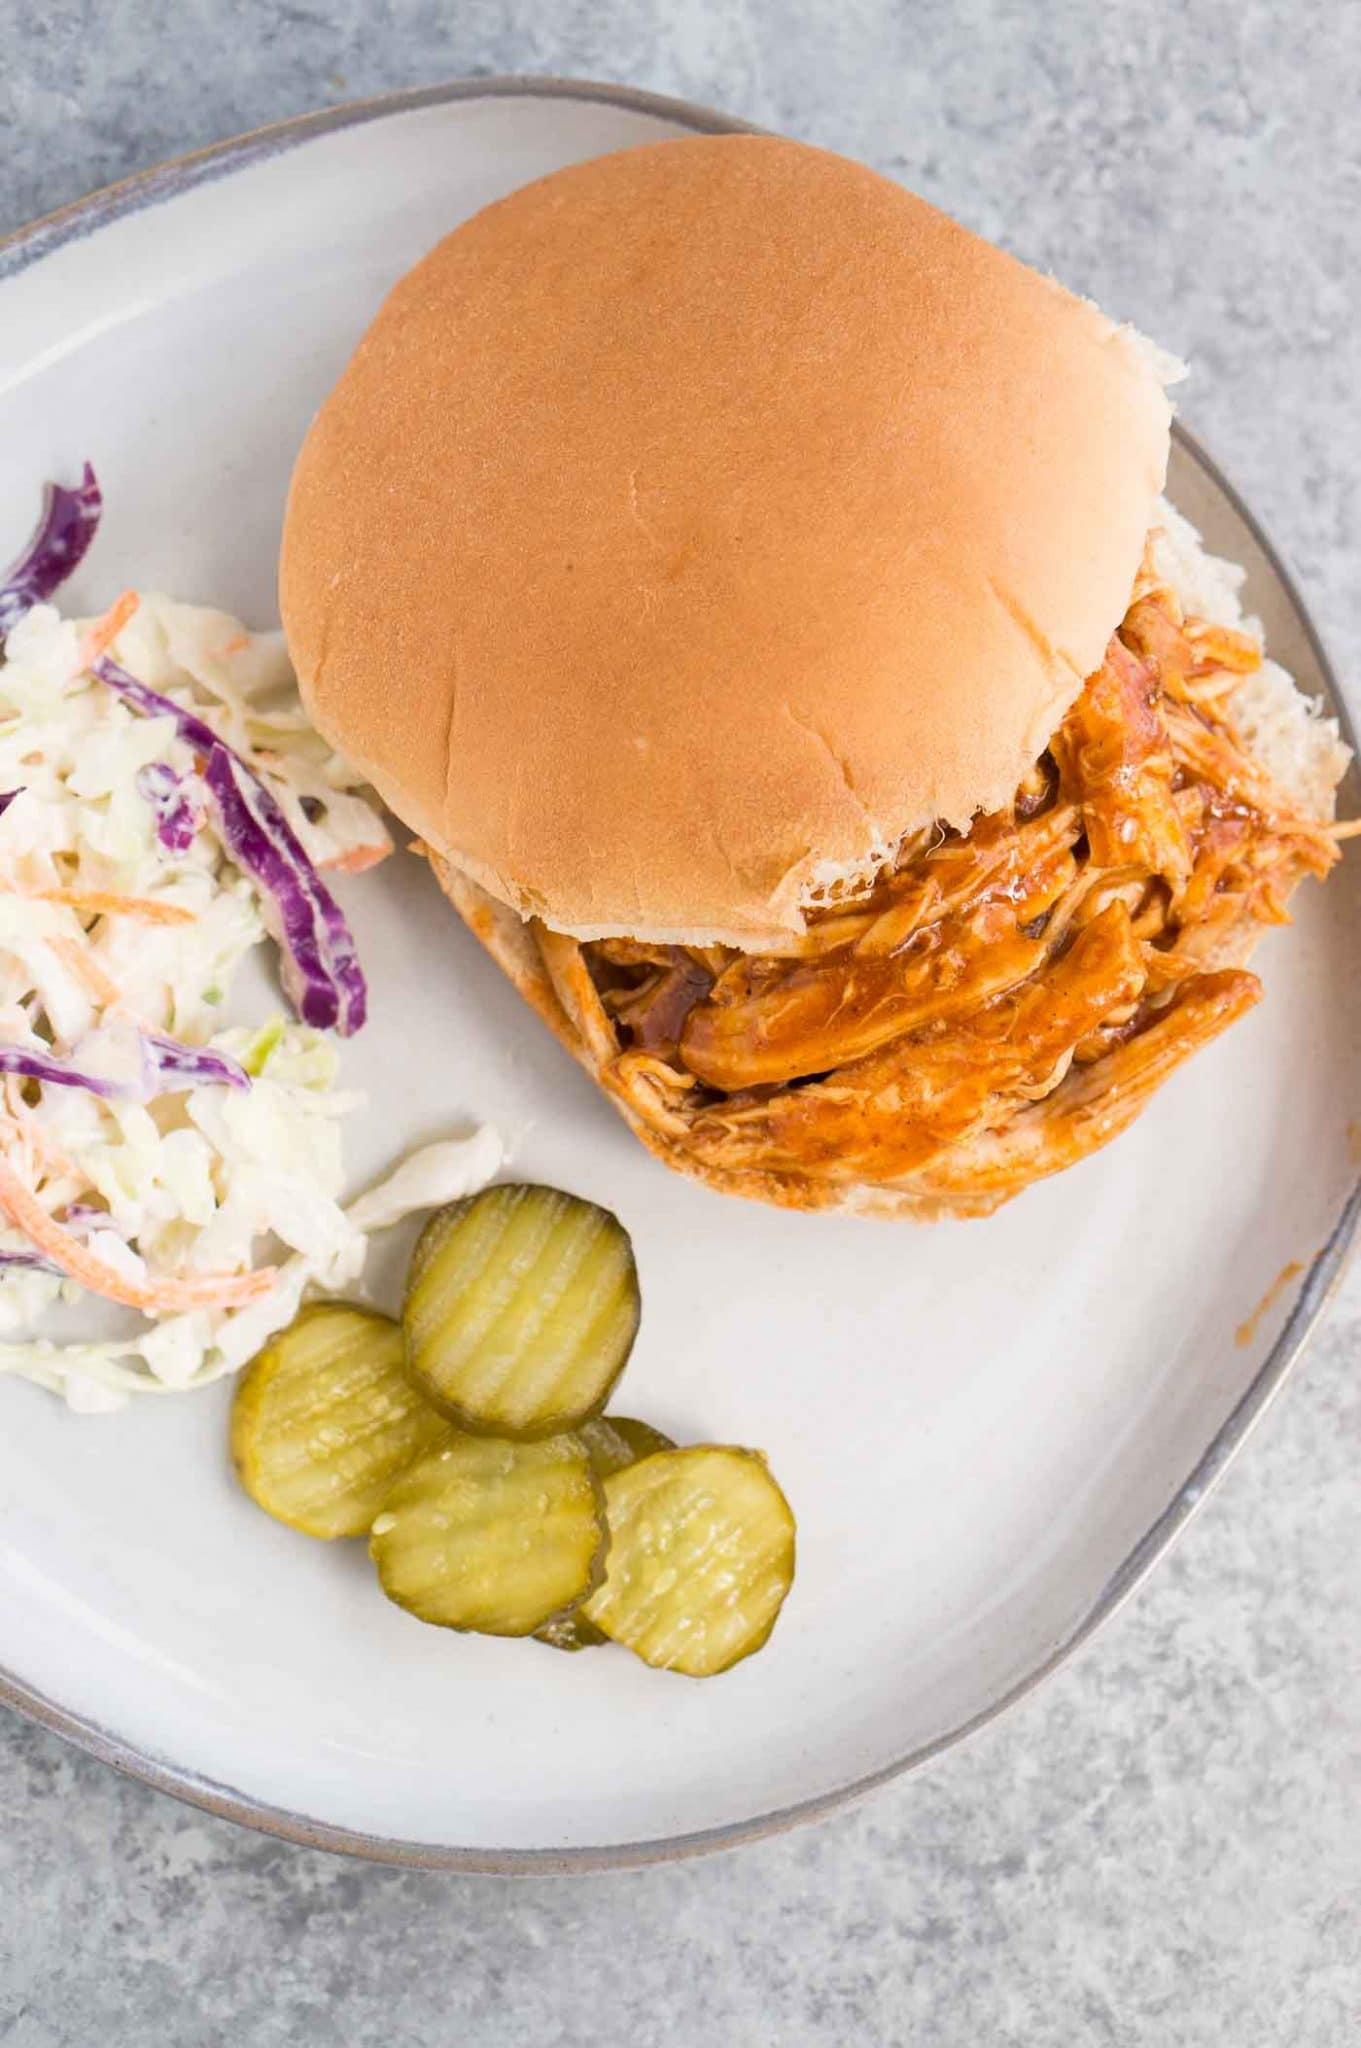 pressure cooker pulled chicken served on a bun with slaw and pickles